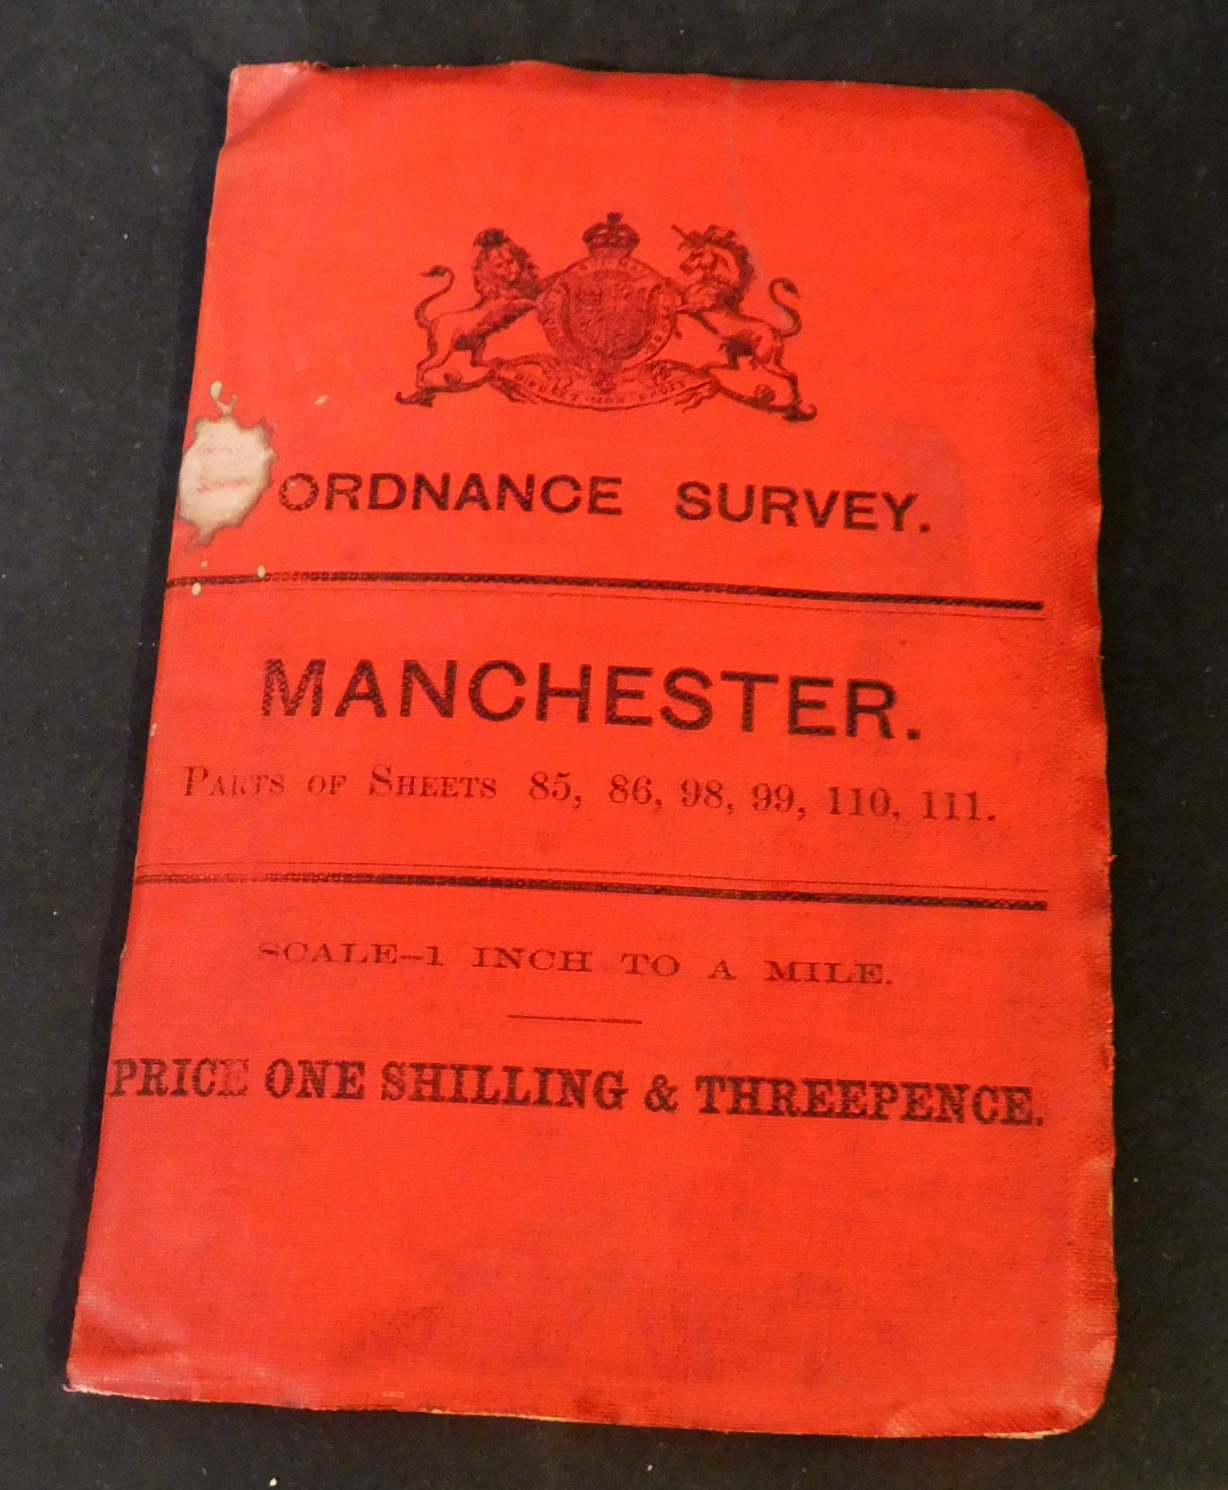 Ordnance Survey map of Manchester, folding, 1901, part of sheets 85, 86, 98, 99, 110 and 111, approx